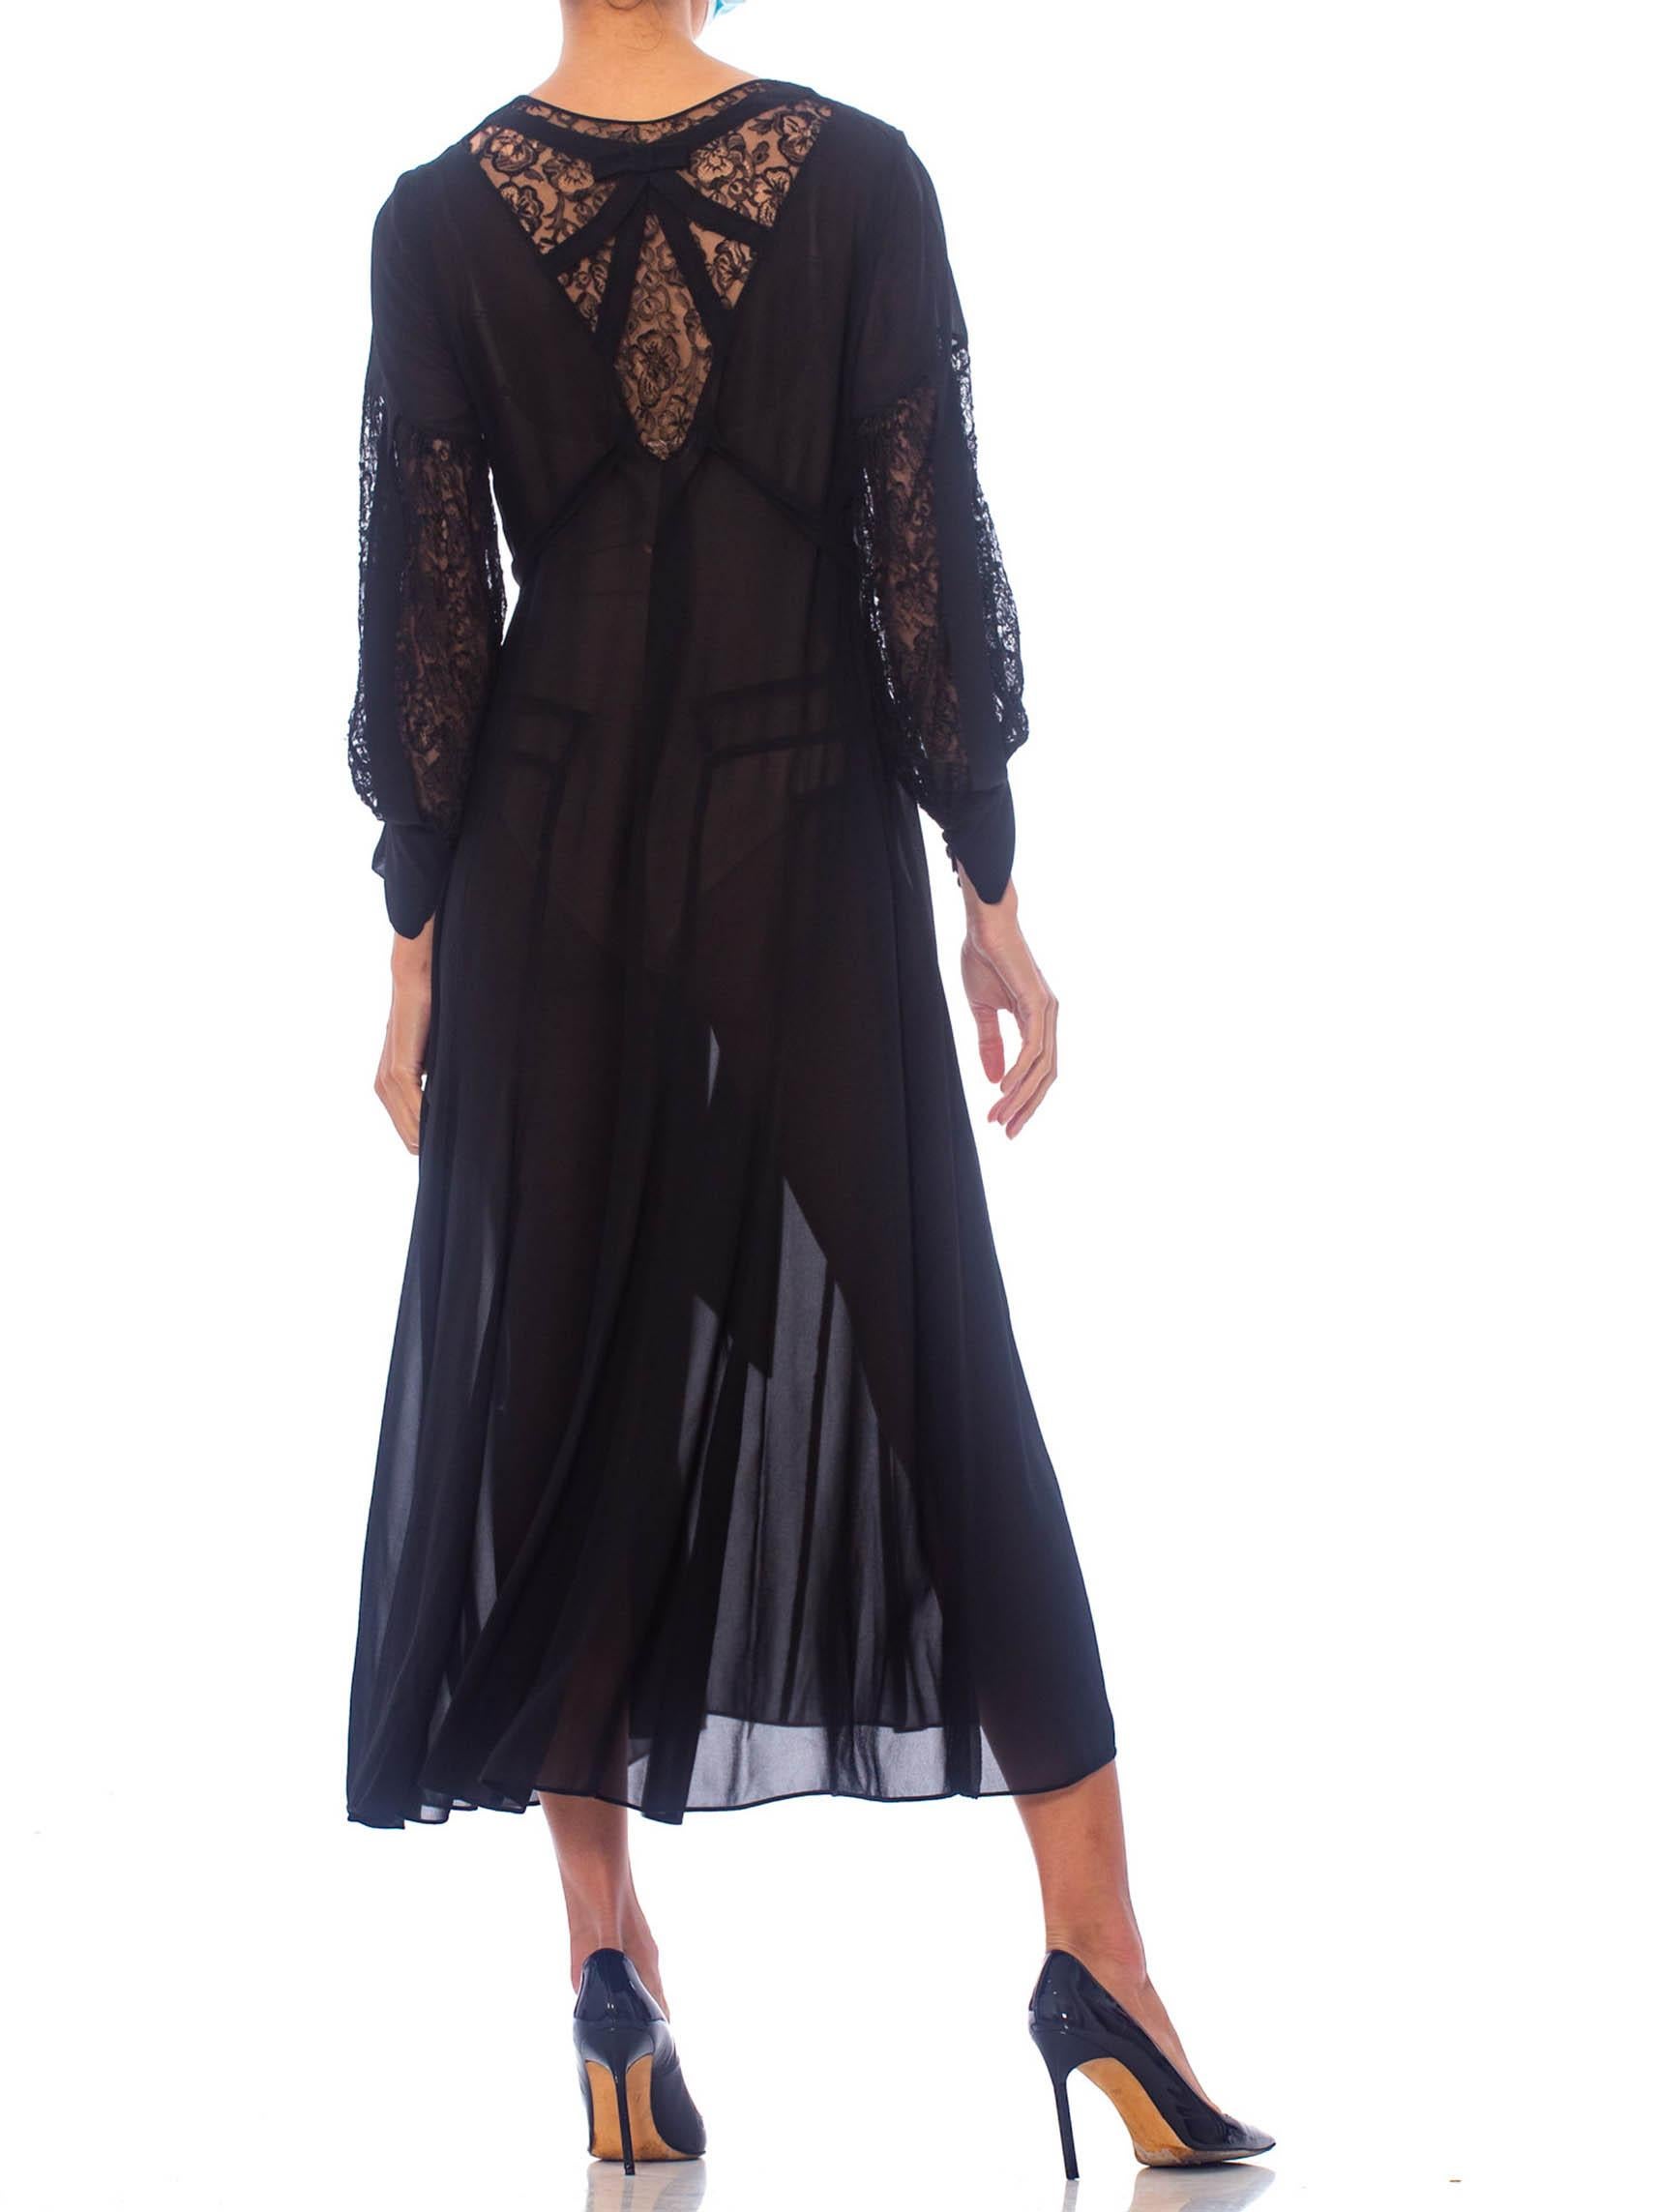 1930S Black Silk Chiffon Tie Waist Dress With Lace Inset Sleeves For Sale 6